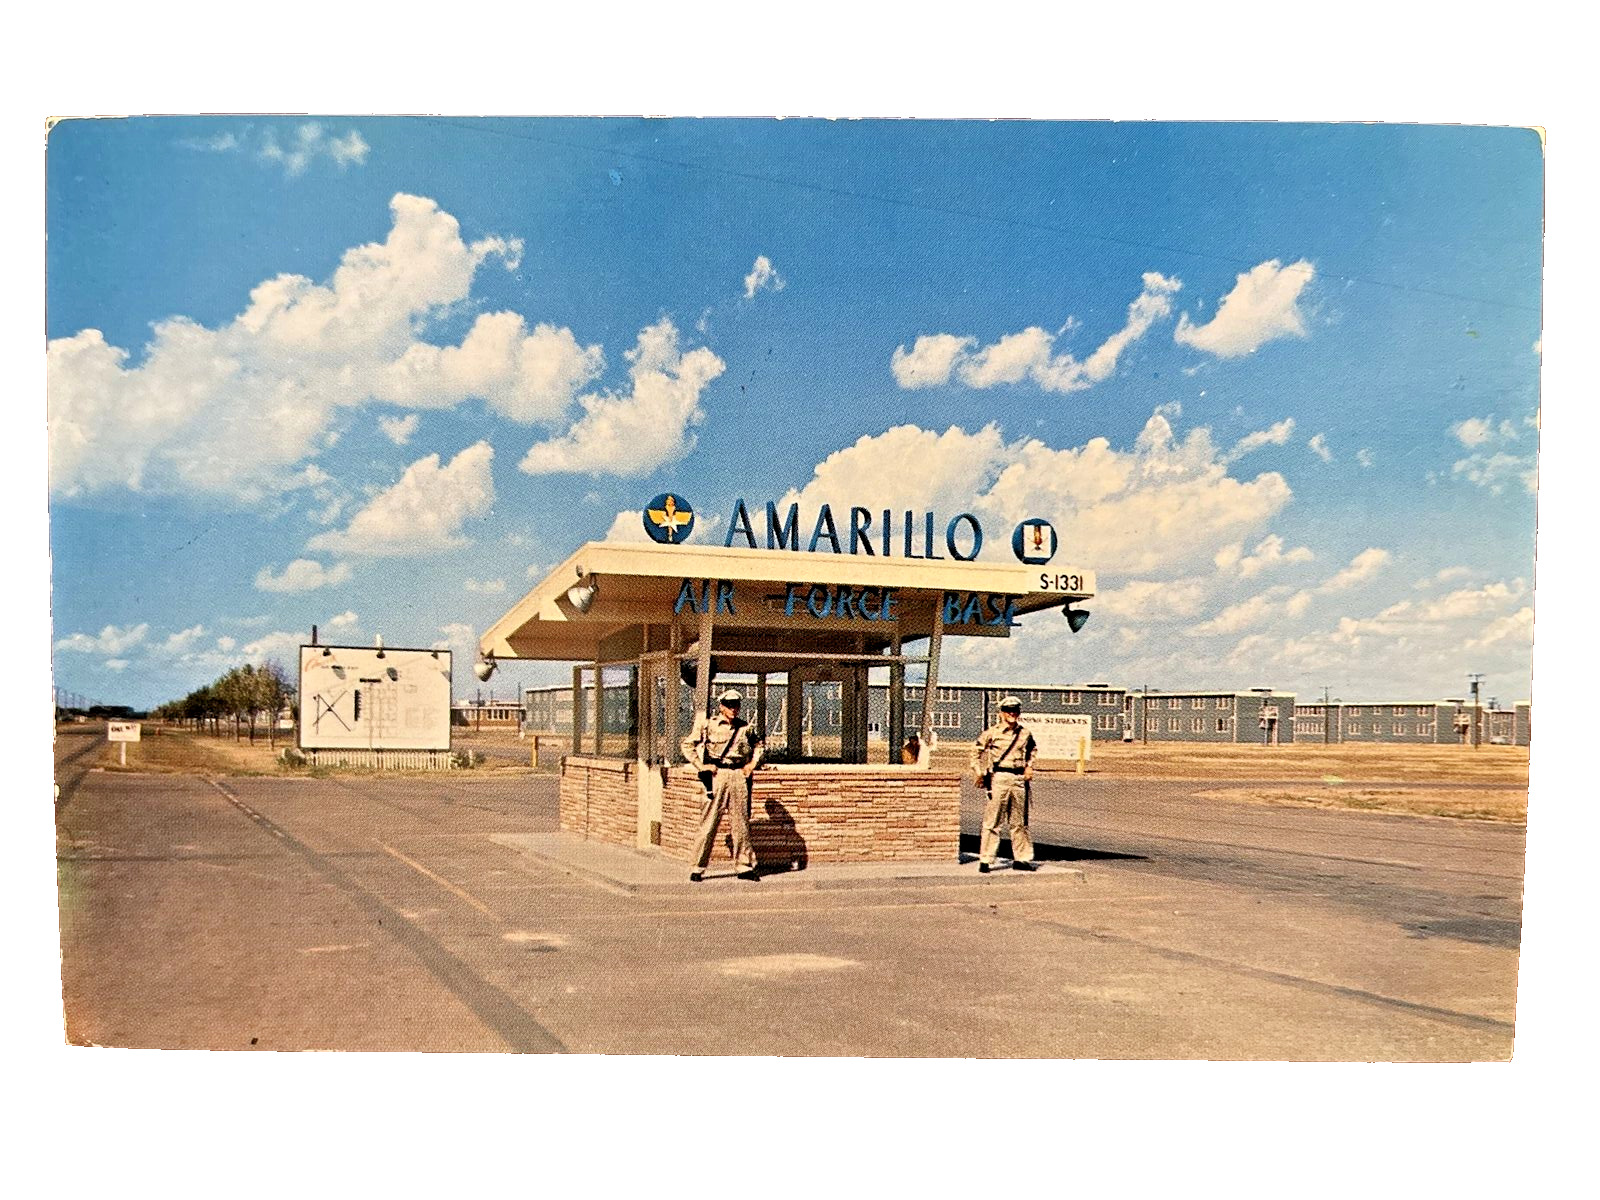 Amarillo Texas Entrance to Amarillo Air Force Base Postcard two uniformed guards